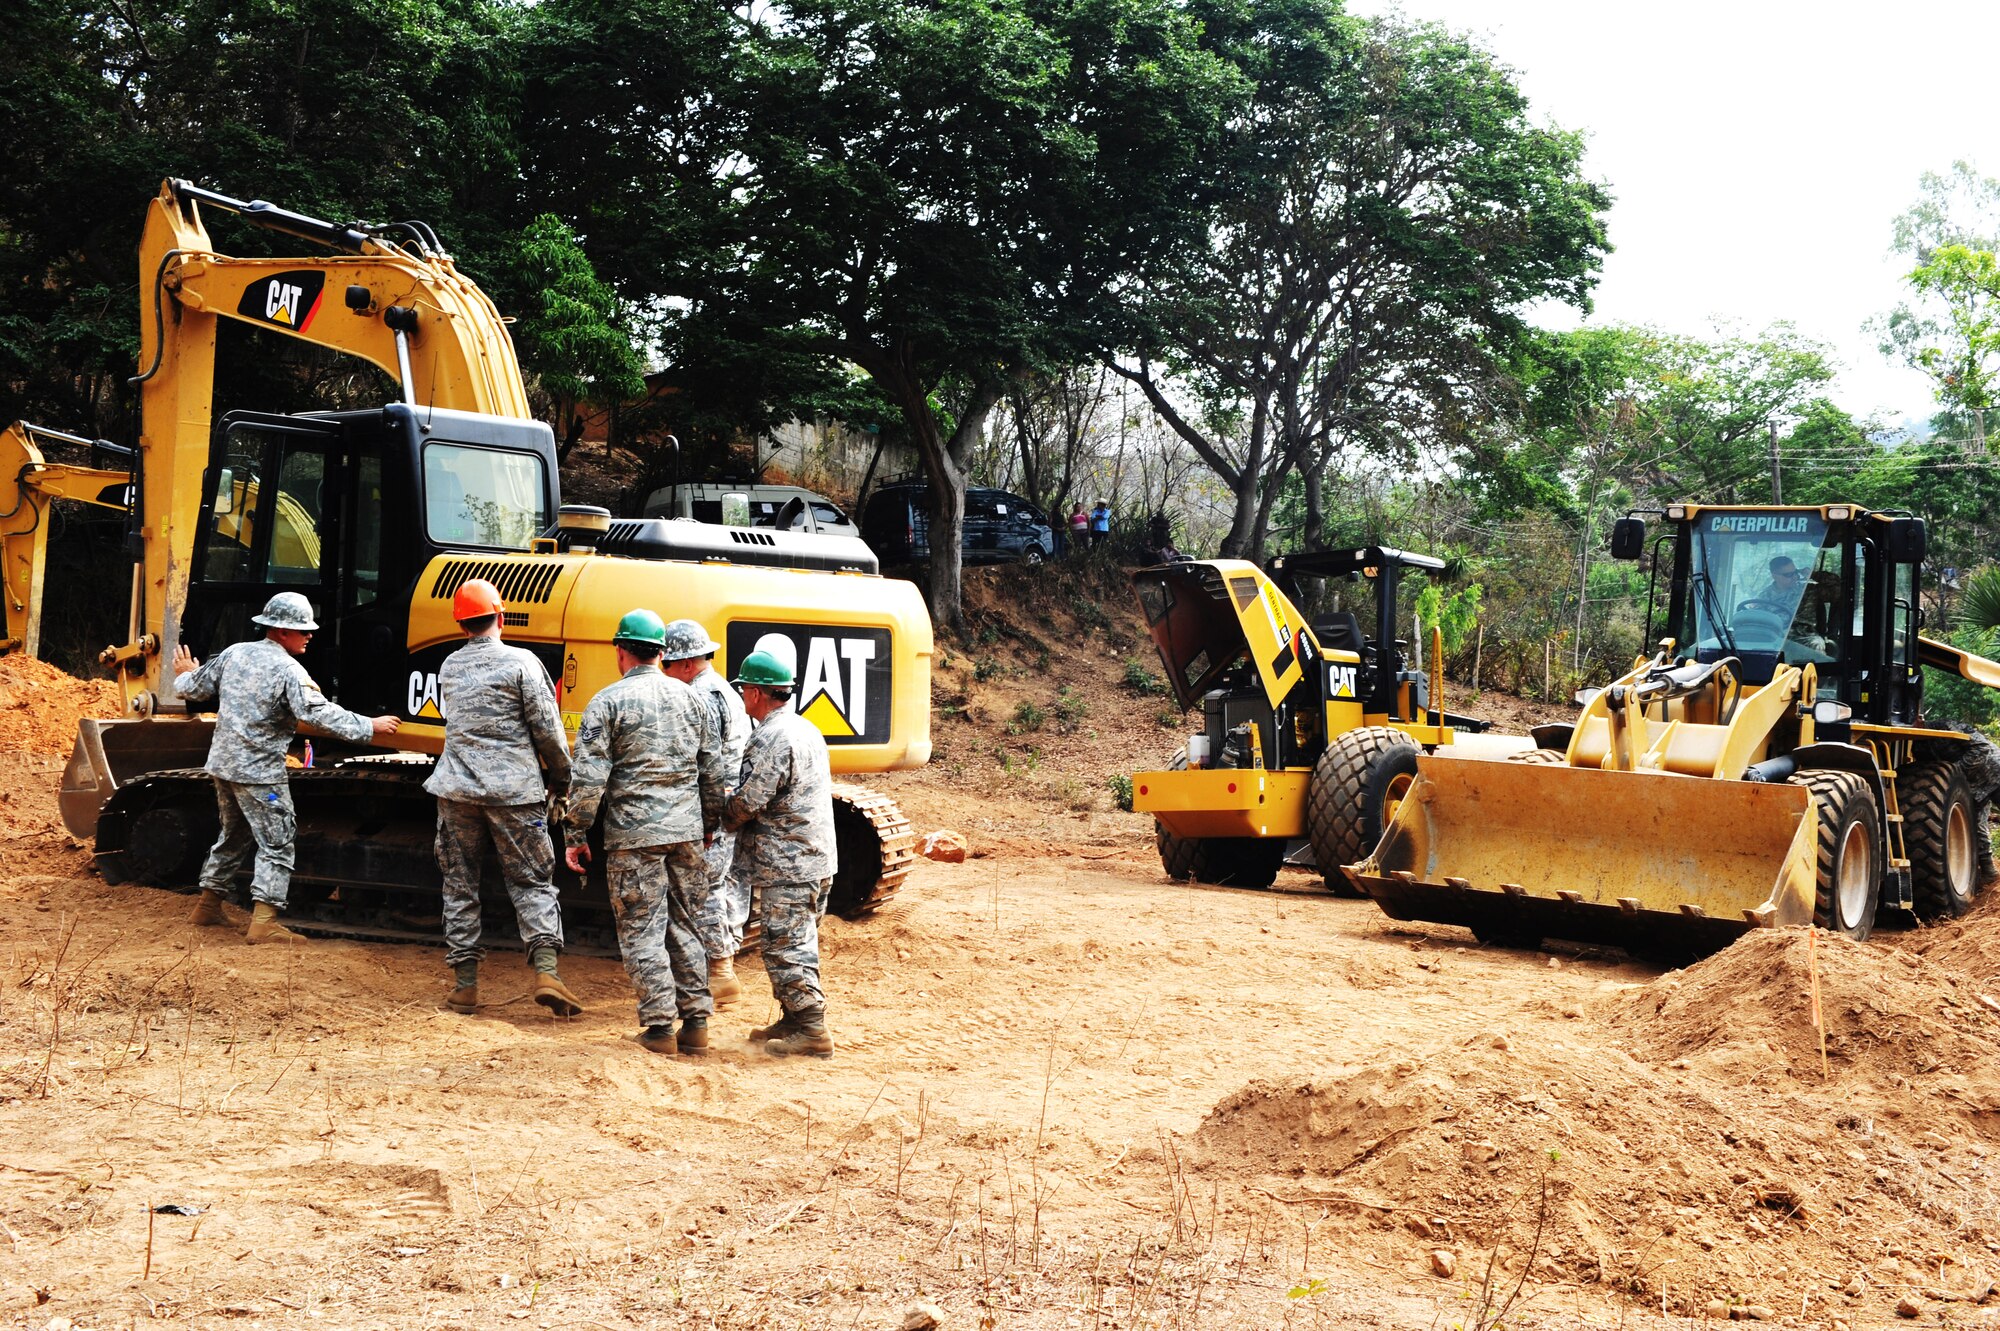 188th Civil Engineer Squadron assigned to Task Force Oso inspect their heavy equipment during a school construction project for Exercise Beyond the Horizon near El Robles, Guatemala, April 8, 2014. Beyond the Horizon is a humanitarian and civic assistance mission deploying U.S. military engineers and medical professionals to Guatemala for training and to provide humanitarian services. (U.S. Army Photo by Staff Sgt. Michael L. Casteel) 